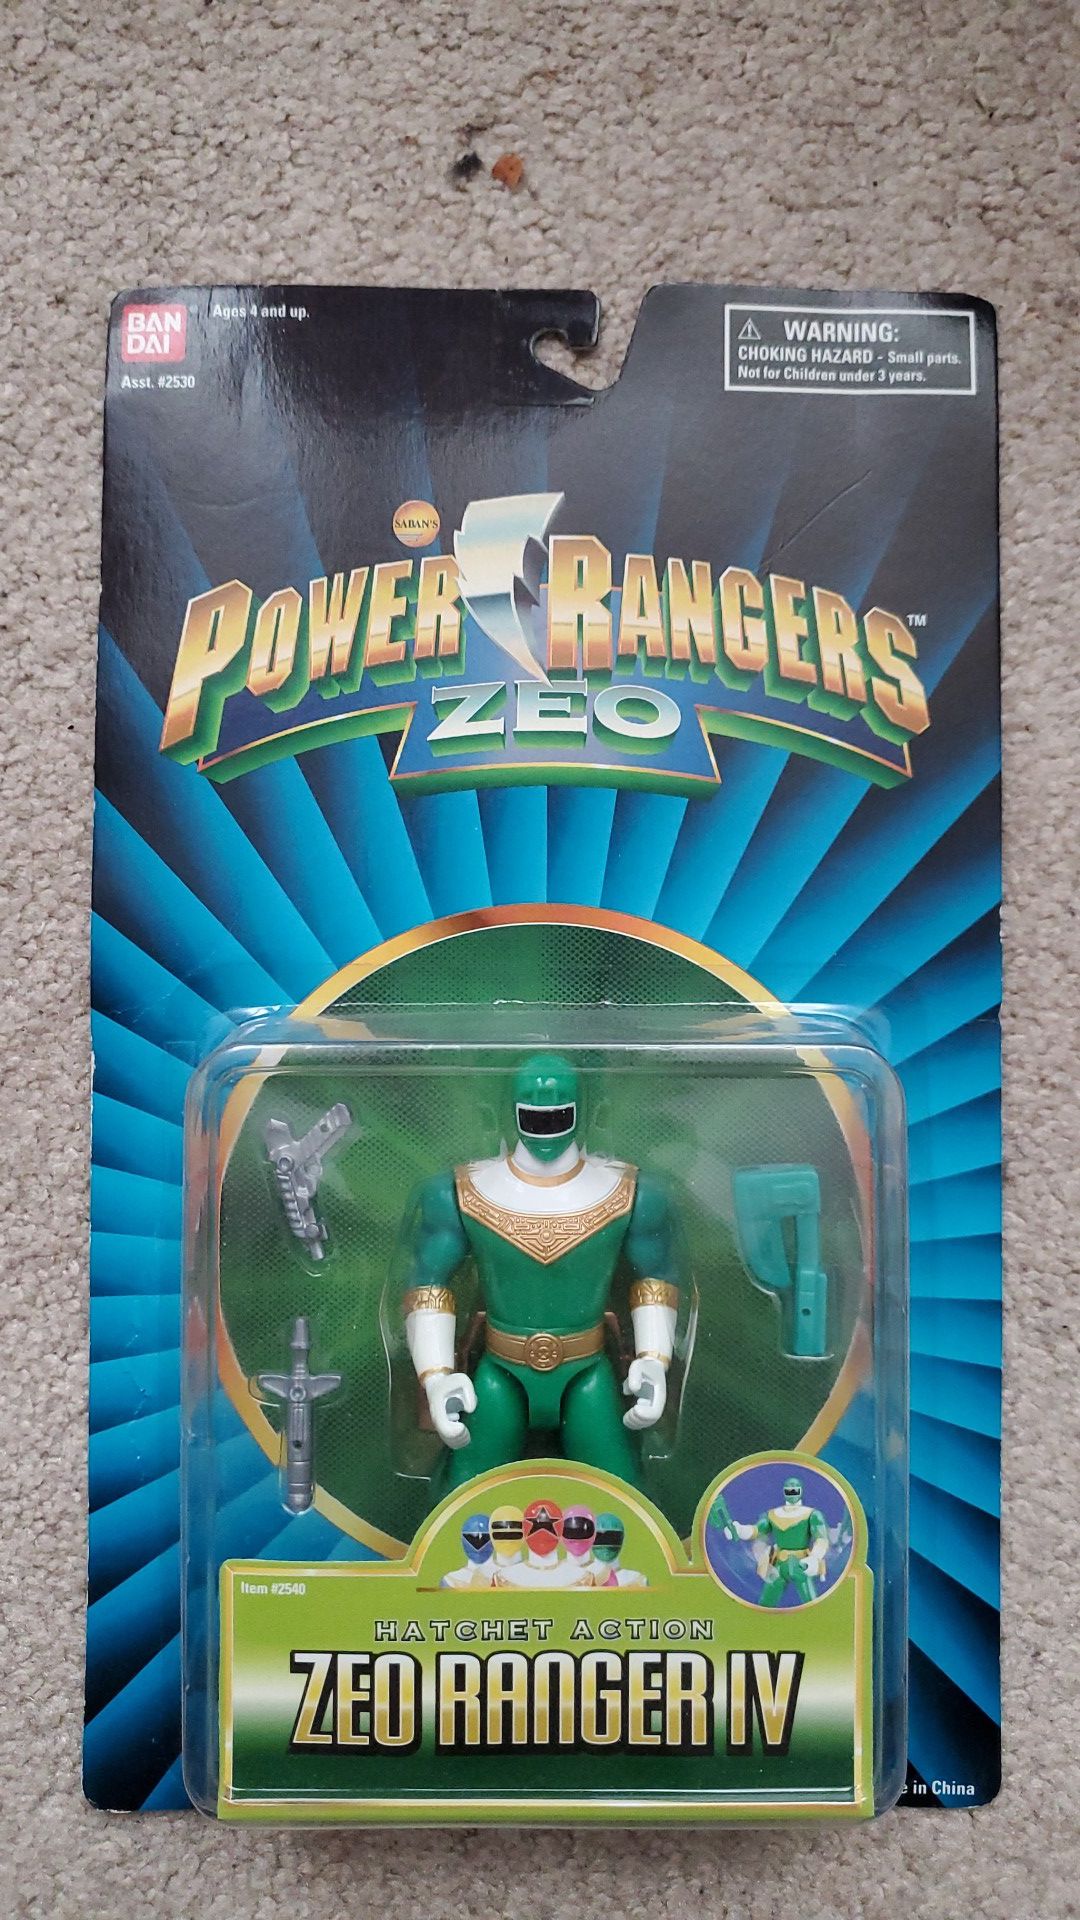 Vintage power ranger action figure from 1995 will trade for gi joes or ultimate soldiers